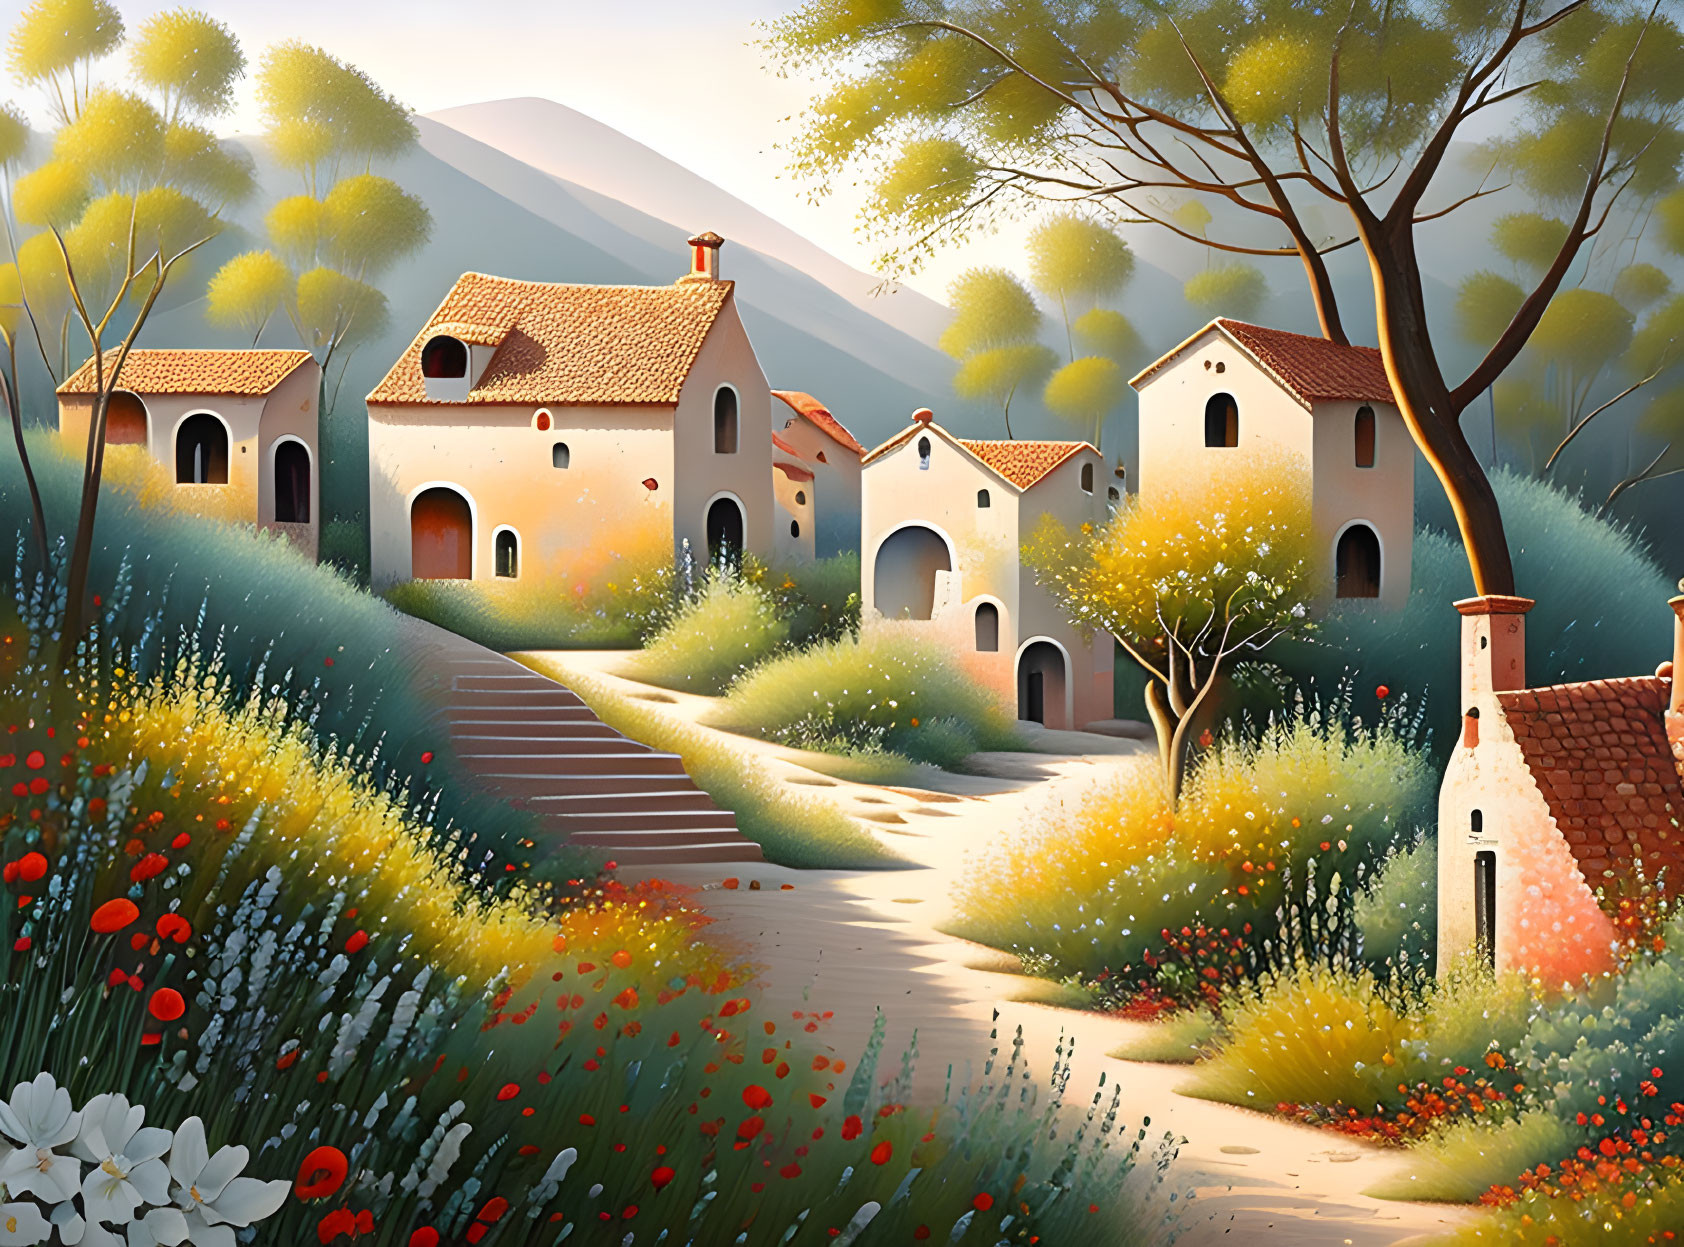 Tranquil village scene with white houses, red roofs, lush nature